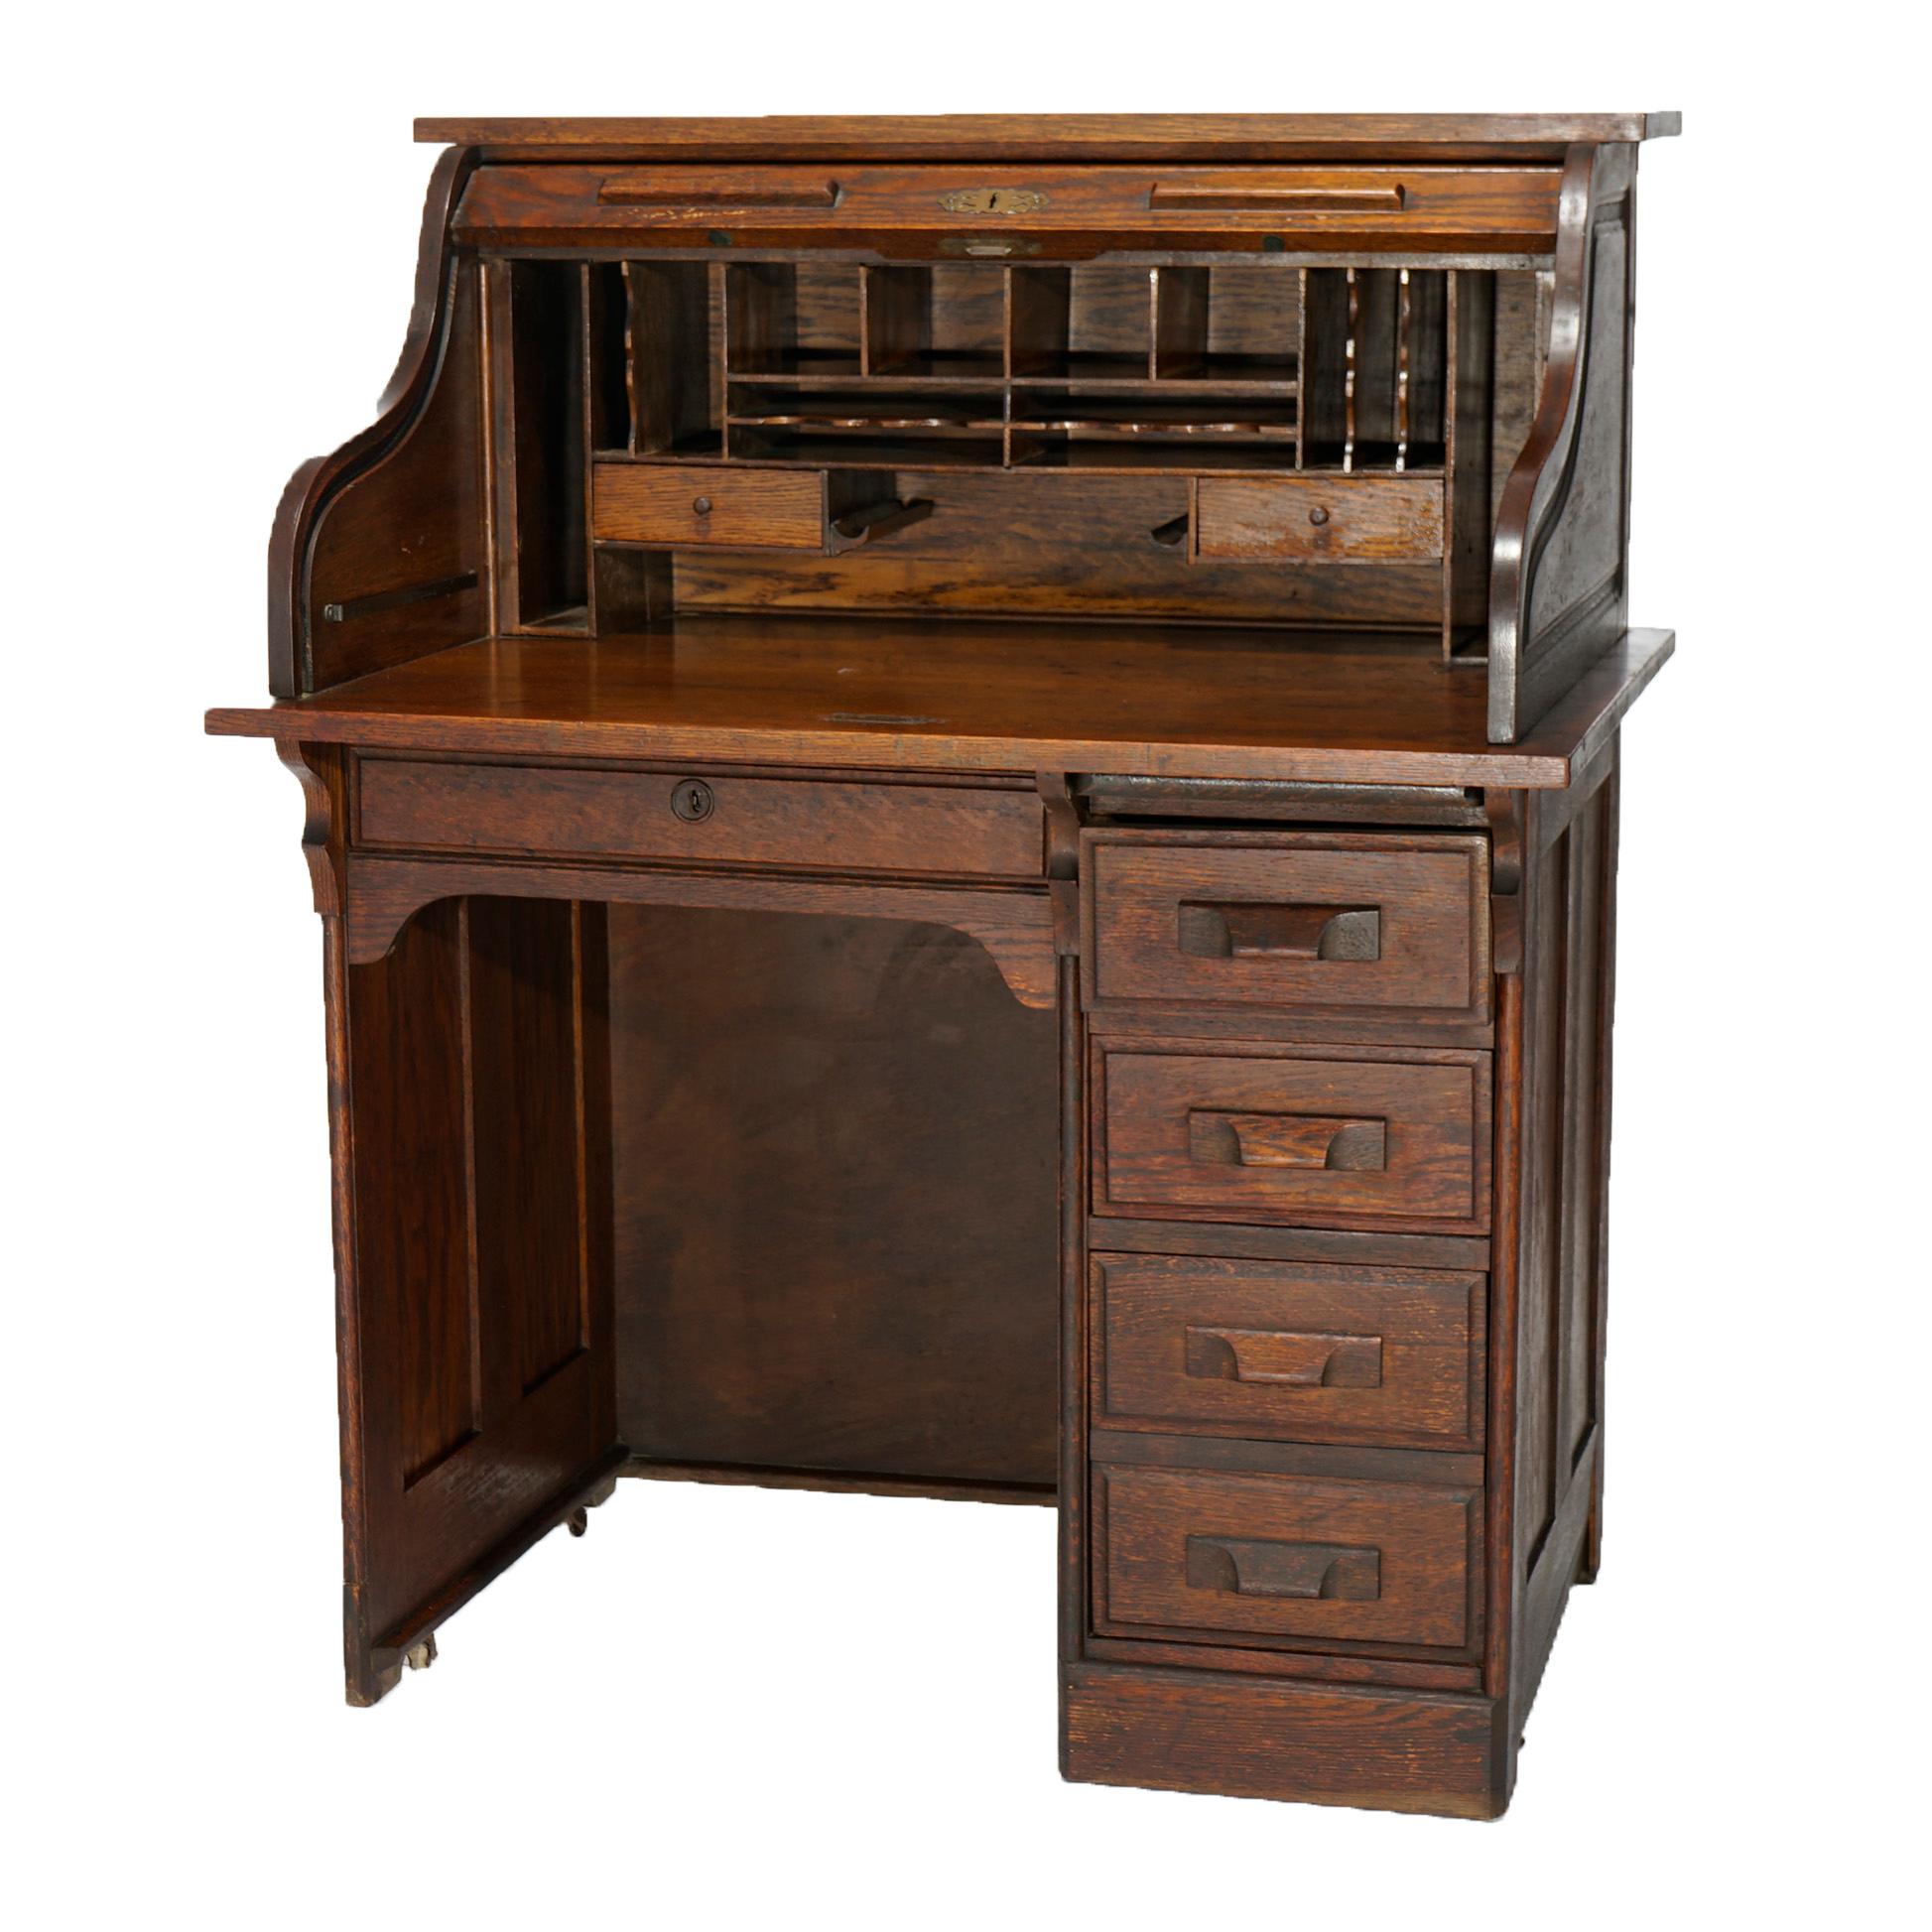 An antique ladies desk offers paneled oak construction with s-roll top opening to compartmentalized interior over base with single drawer column, includes two keys, c1910

Measures- 45.25''H x 36.25''W x 26.25''D.